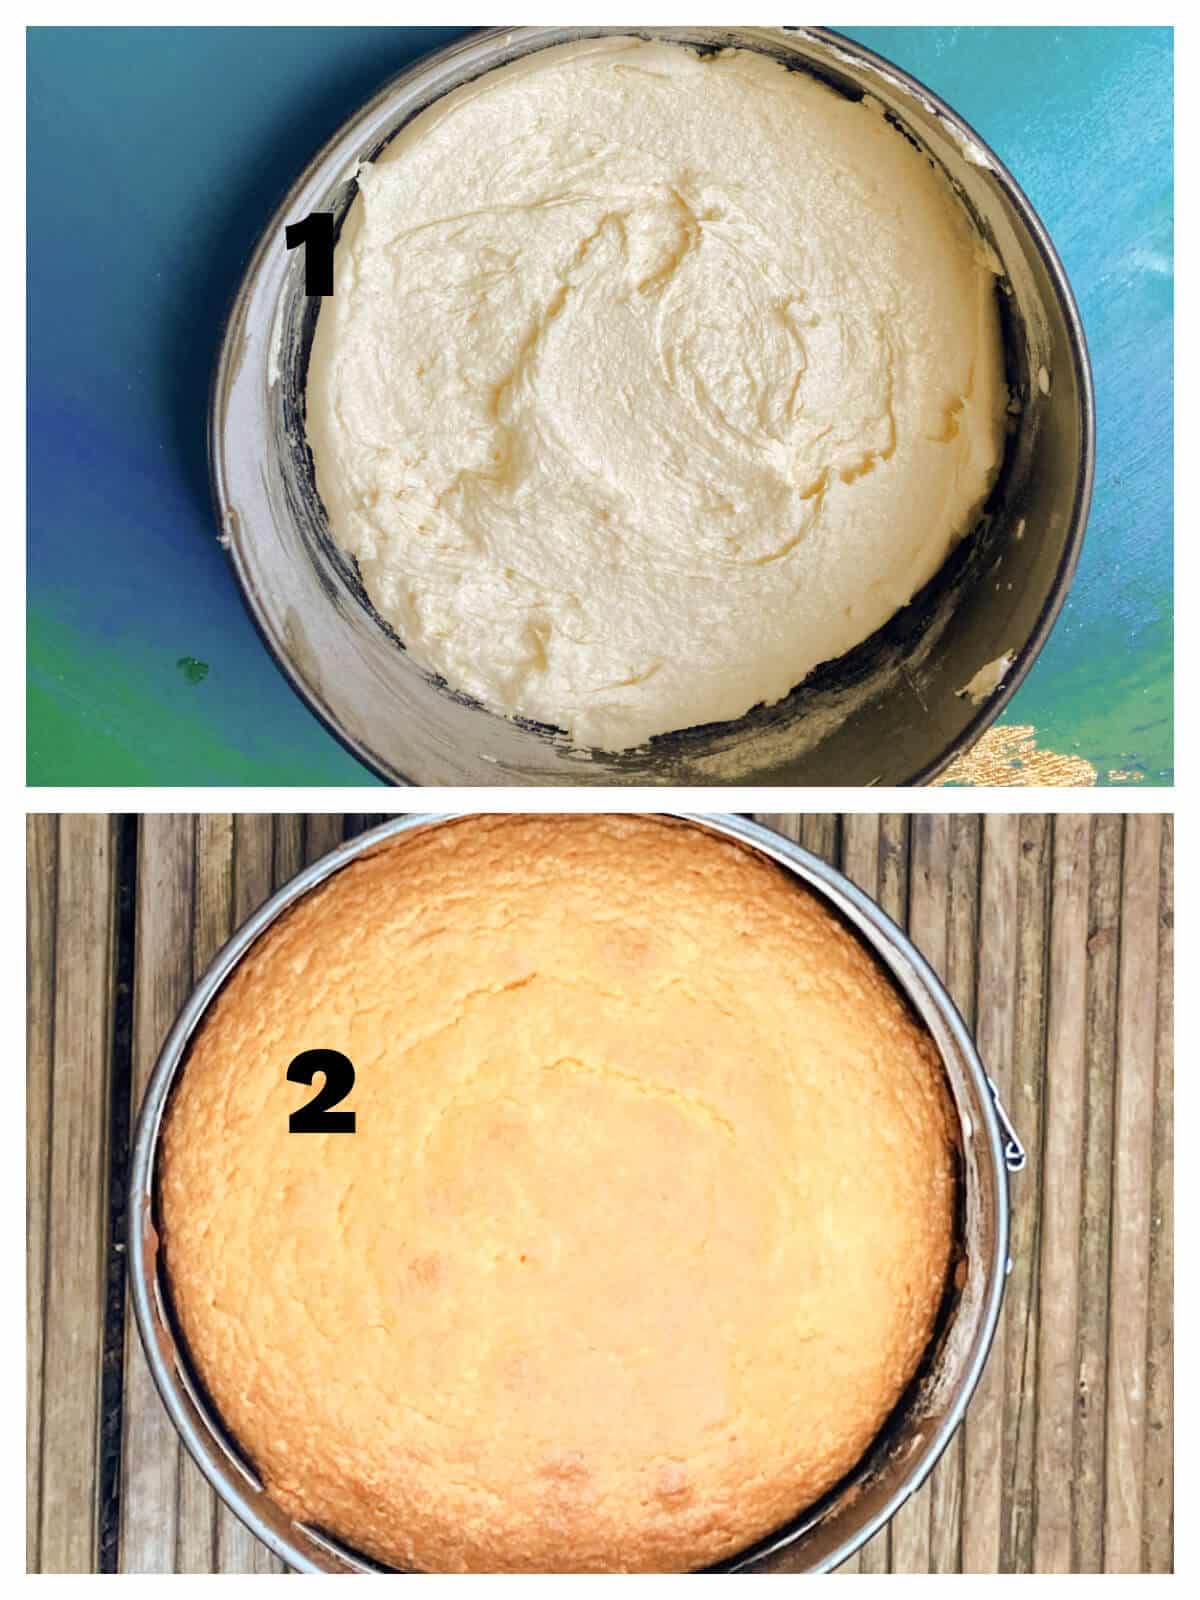 Collage of 2 photos to show an unbaked and a baked sponge cake.